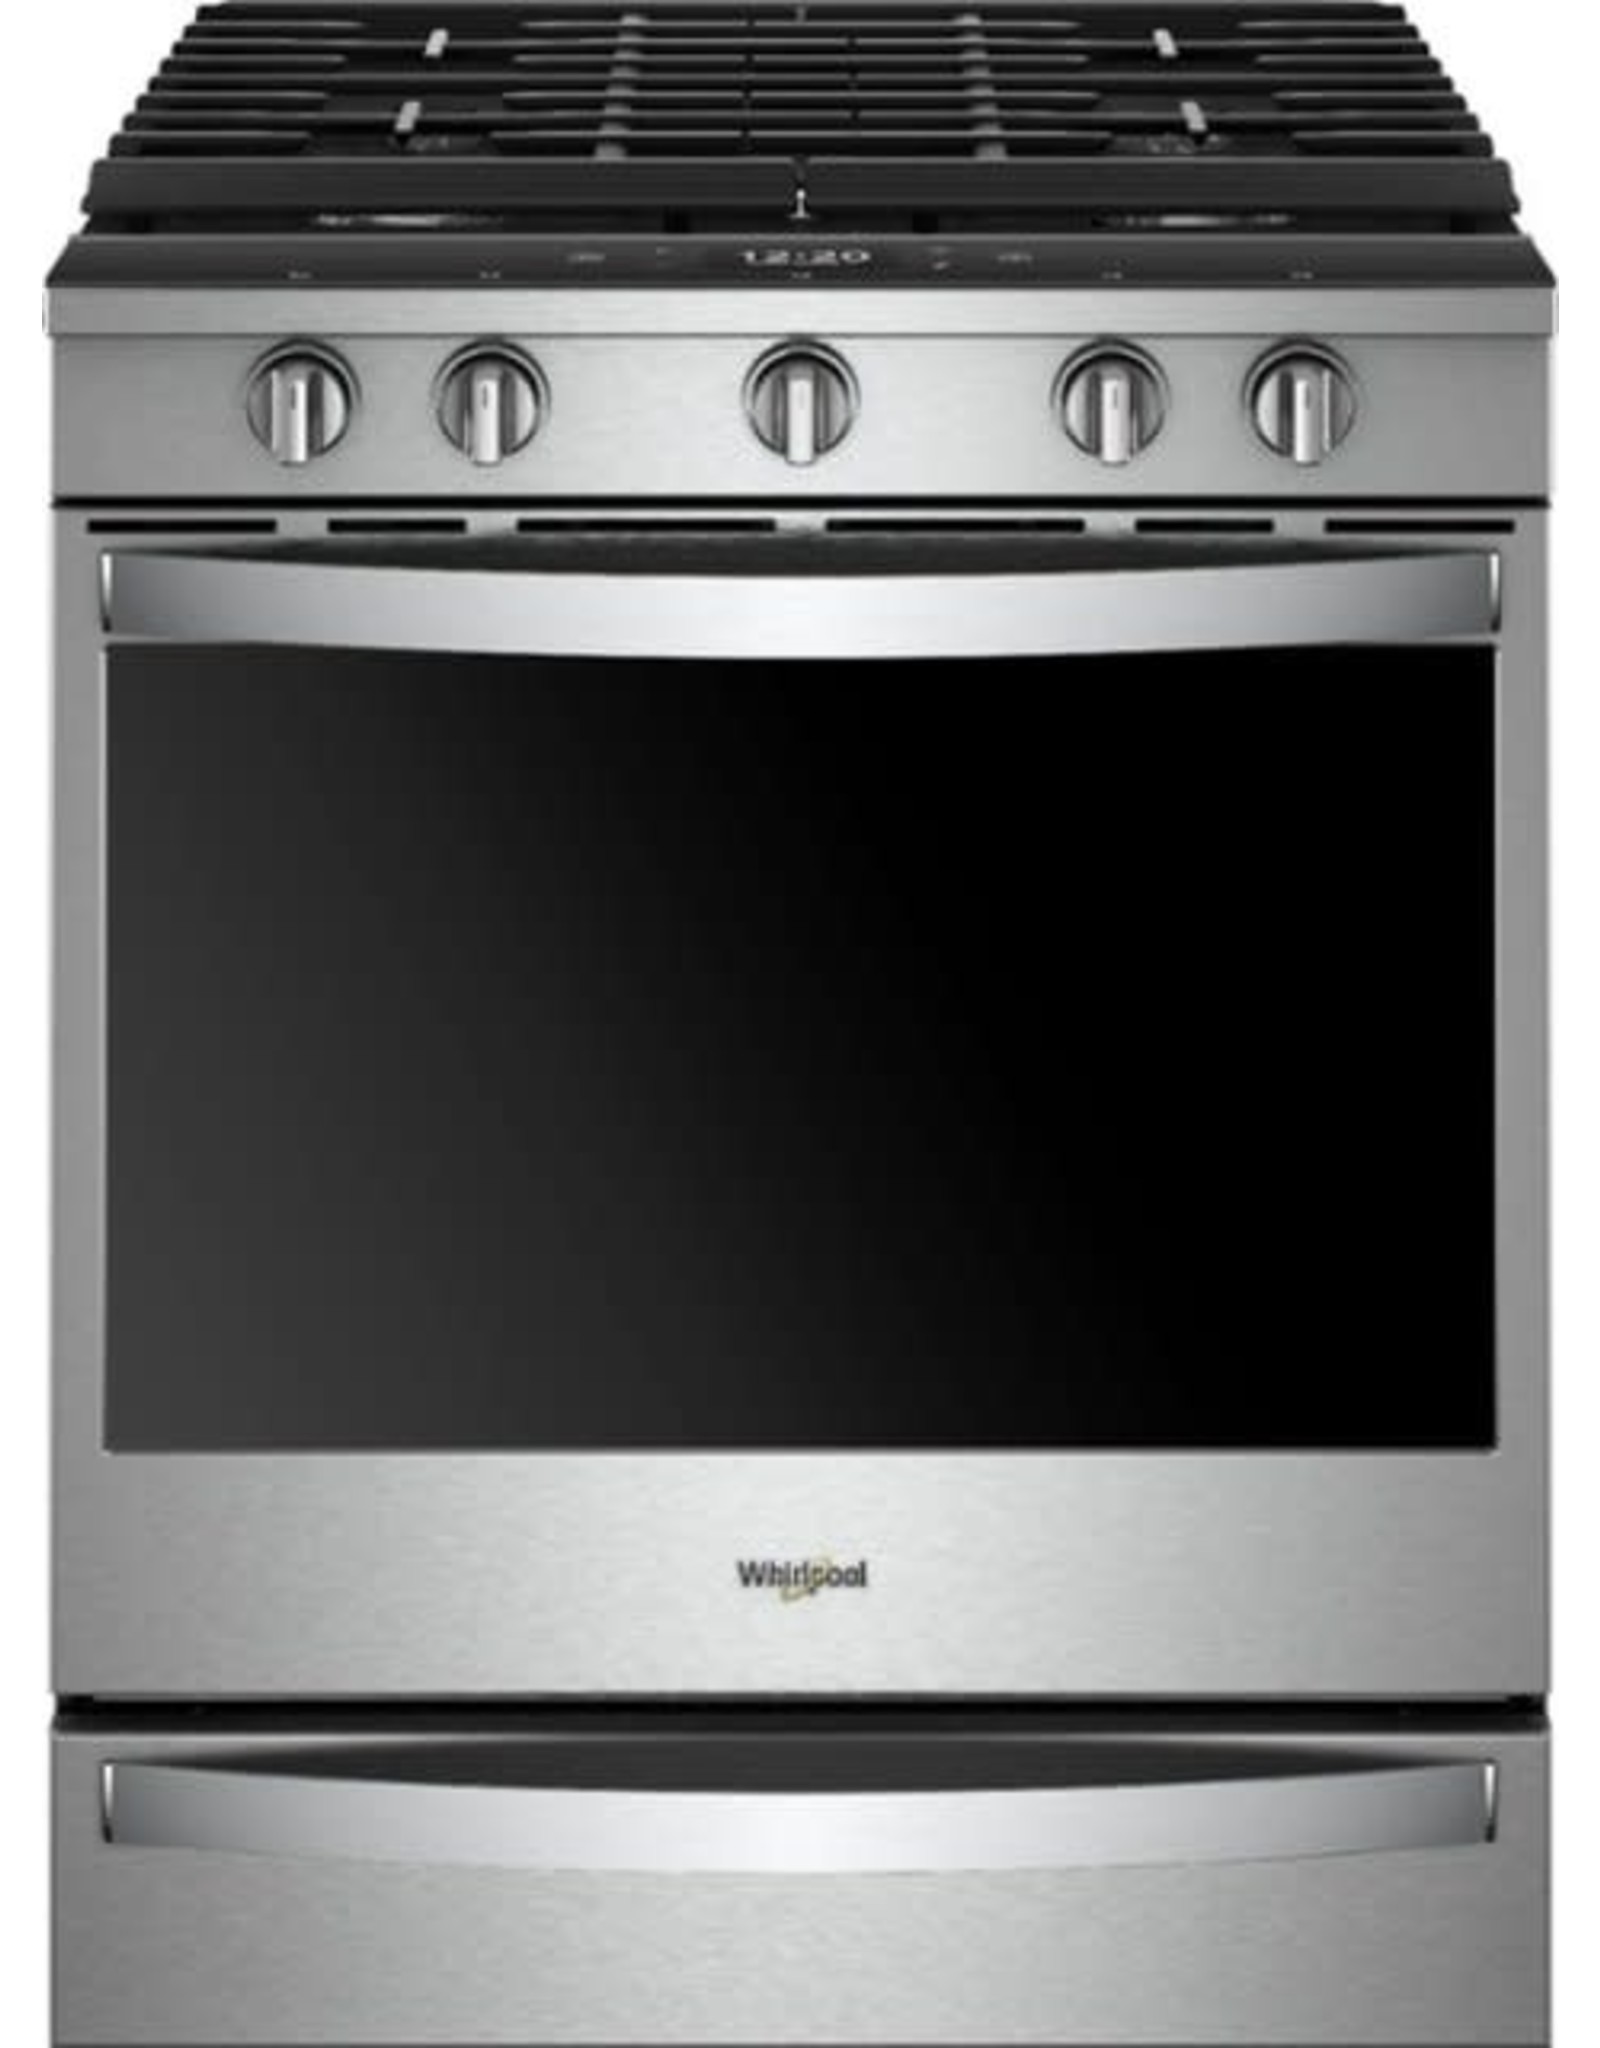 WEG750H0HZ WHR Whirlpool – 5.8 Cu. Ft. Slide-In Gas Convection Range with Self-Cleaning with Air Fry with Connection – Stainless steel